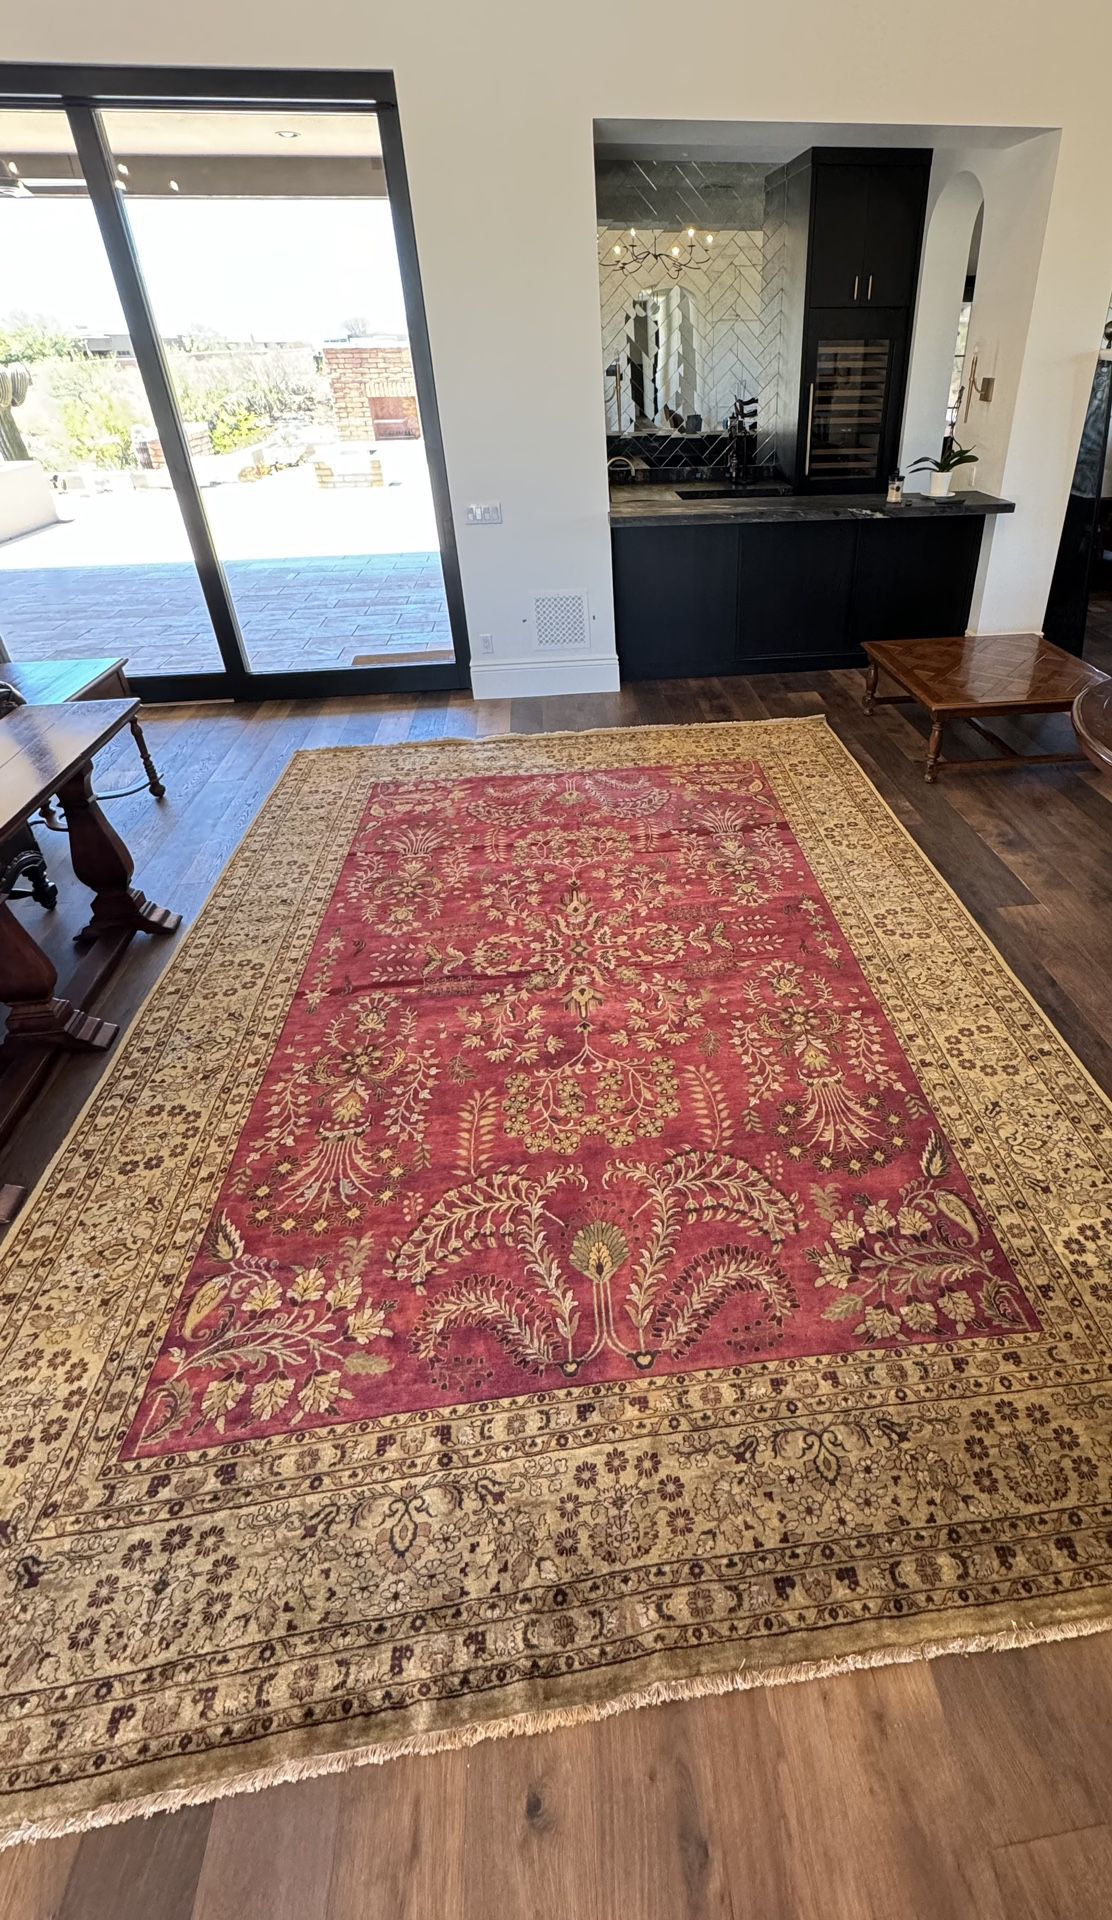 EXQUISITE 10’ x 14’ FINELY HAND KNOTTED 100% WOOL RUG